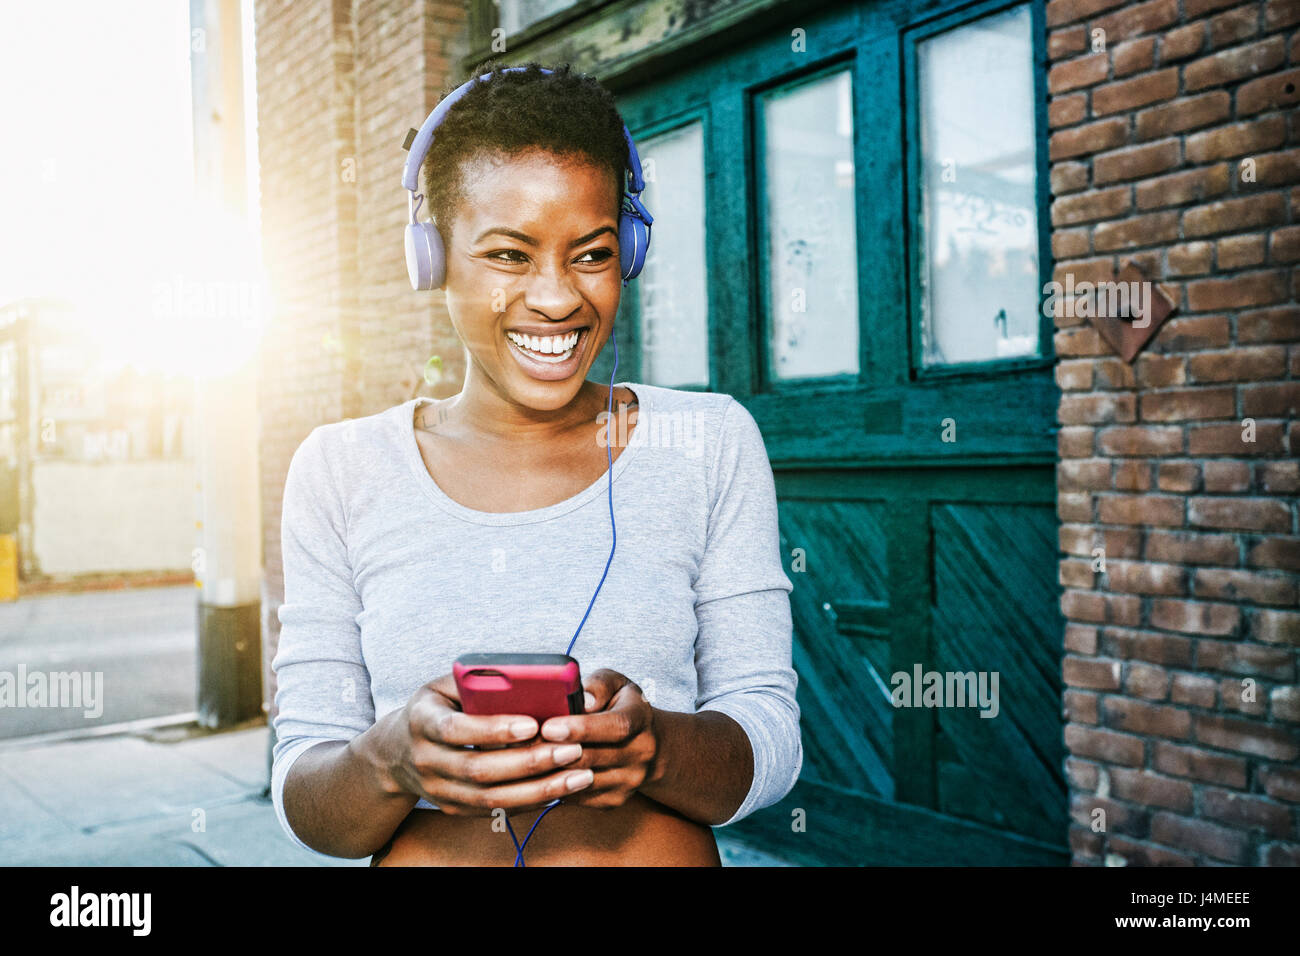 Smiling Black woman listening to cell phone with headphones in city Stock Photo